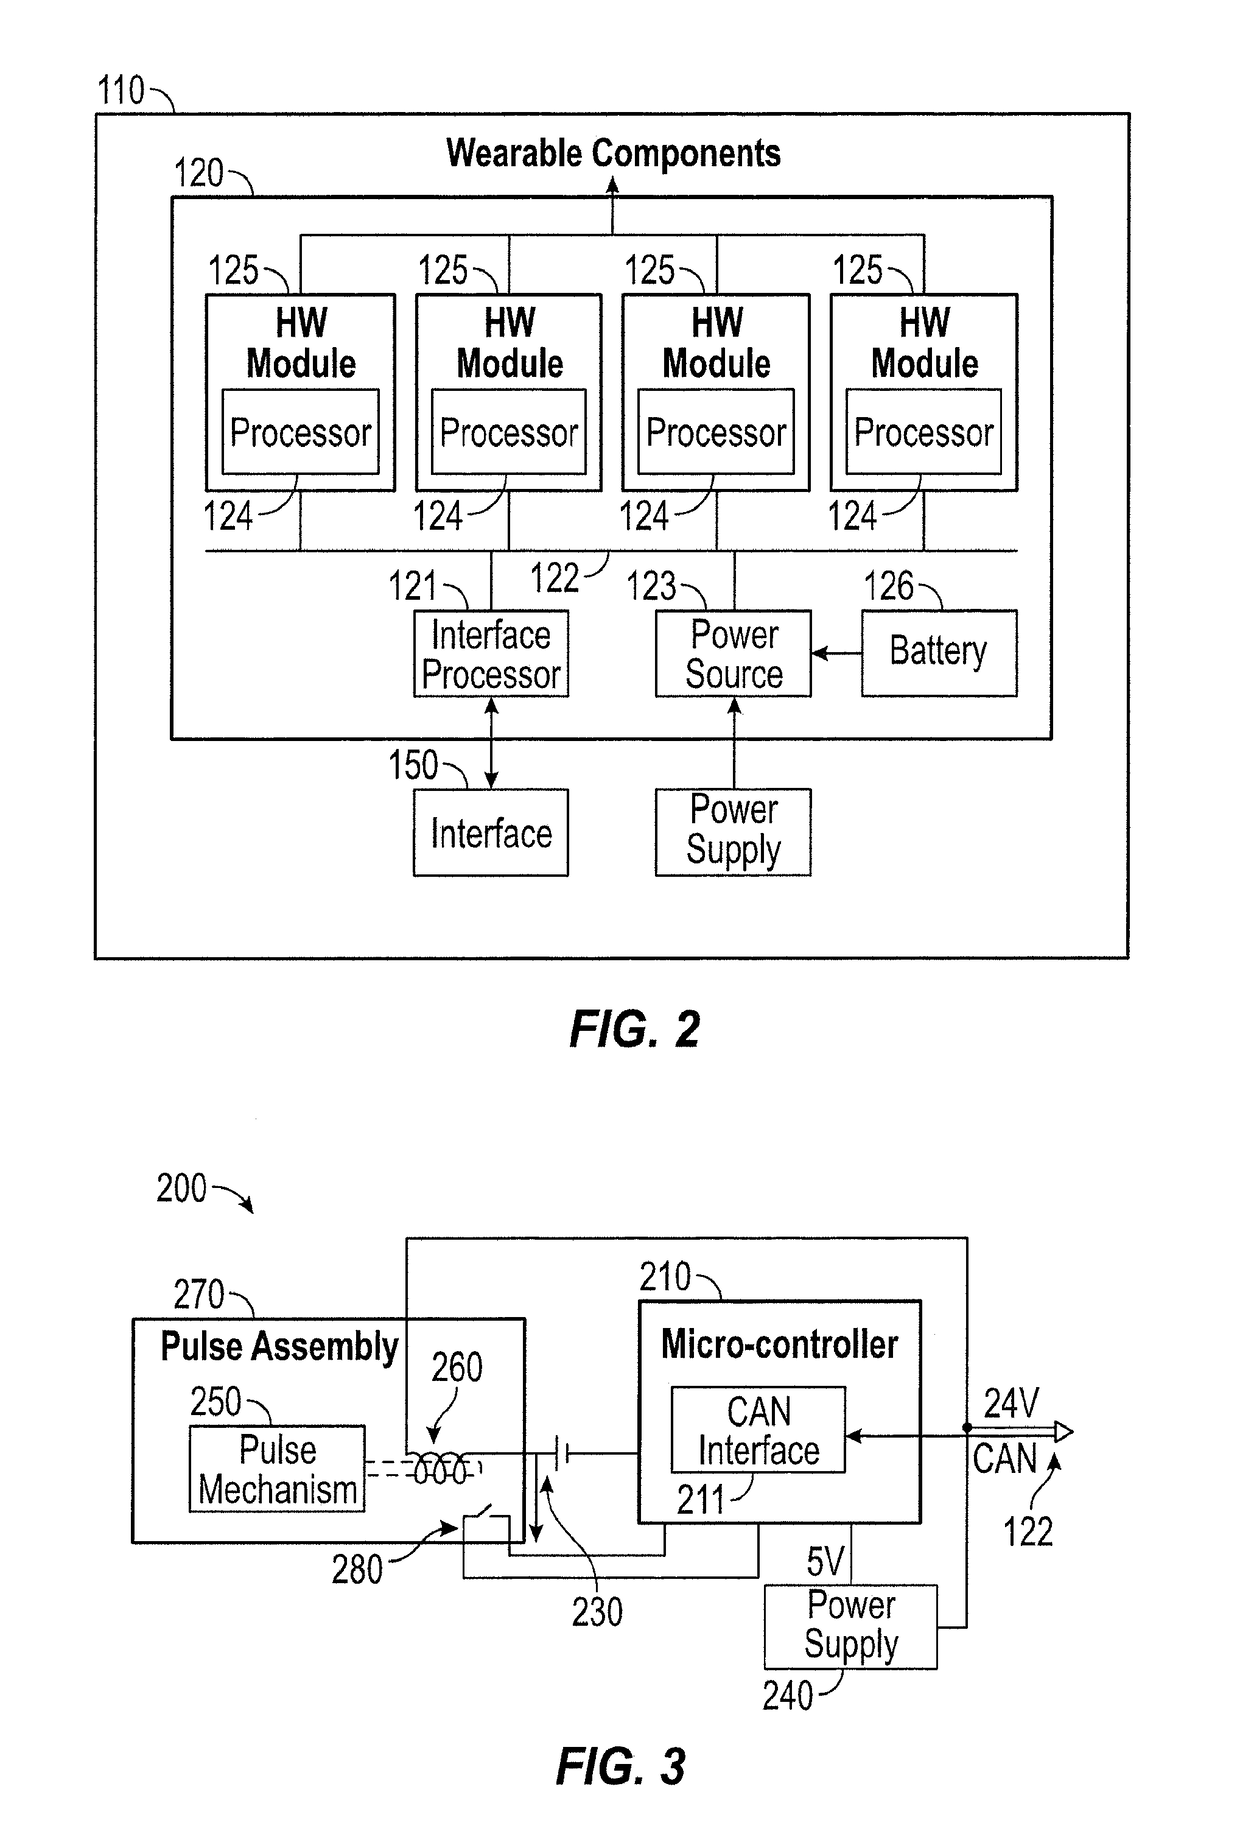 System and method for a wearable medical simulator